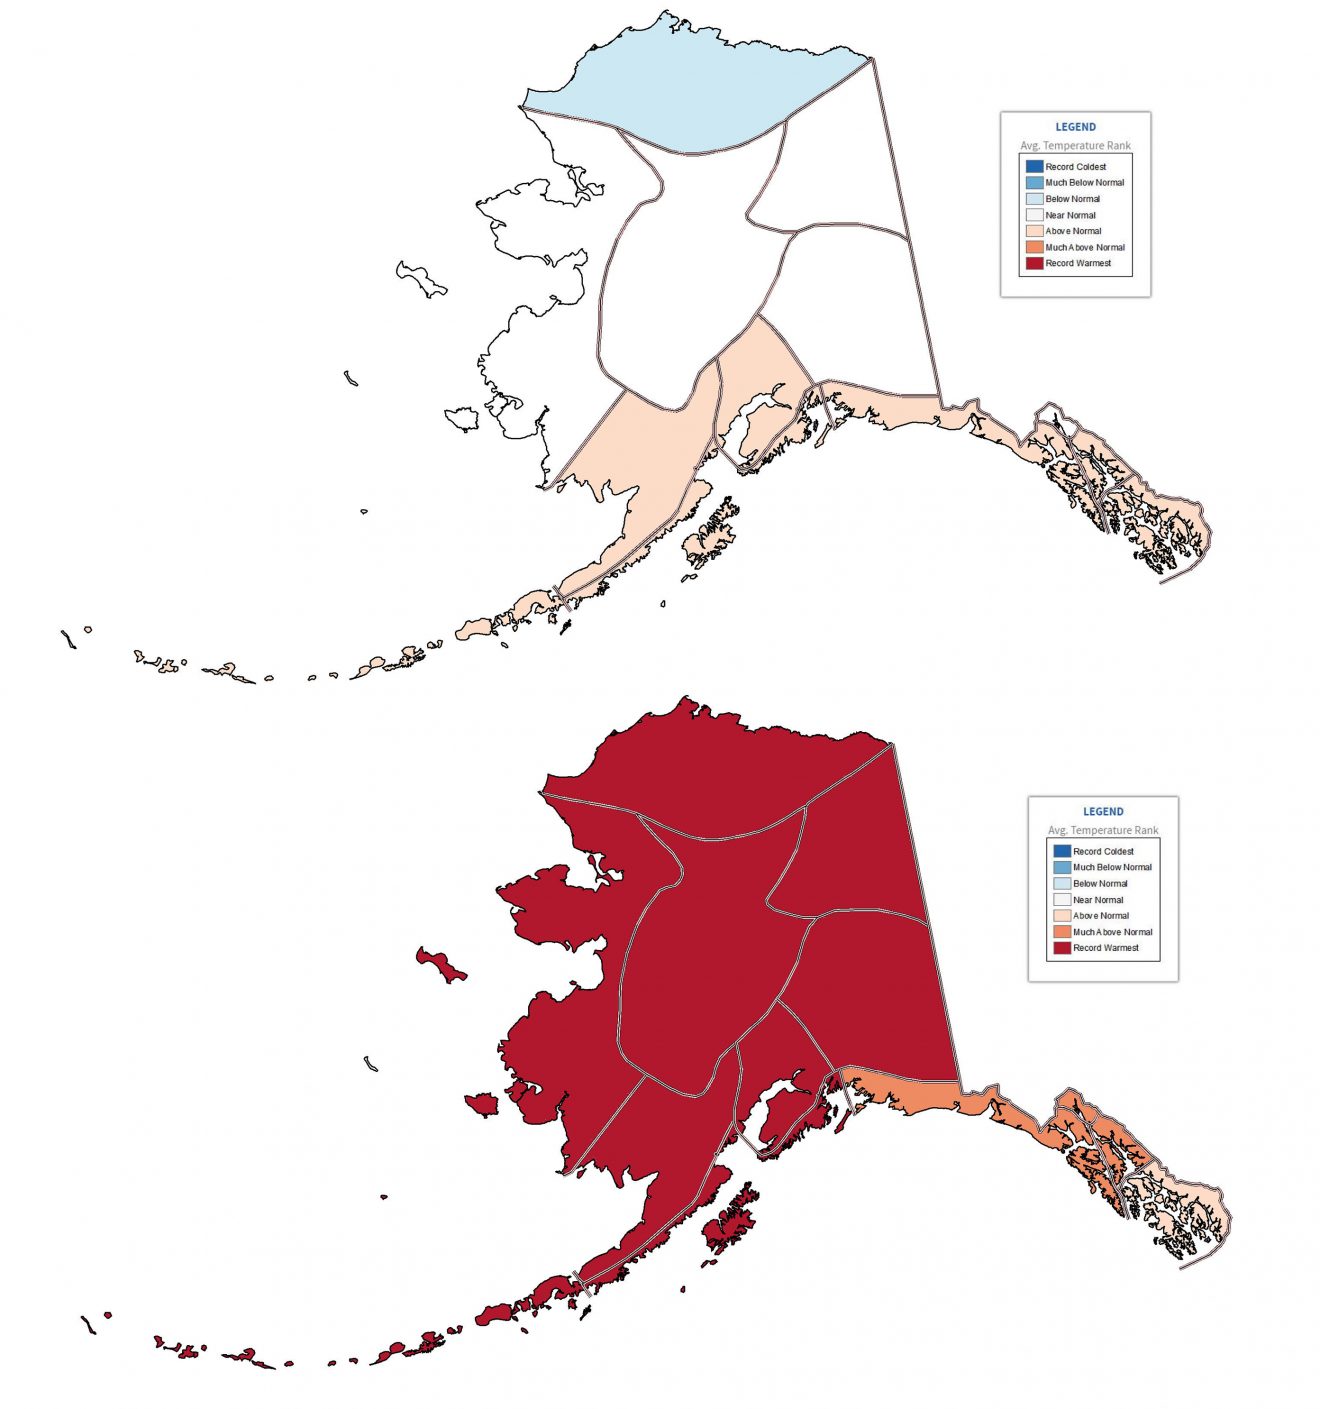 Images courtesy of International Arctic Research Center. Maps show the 13 climate divisions defined by Peter Bieniek and his team of UAF scientists and National Weather Service forecasters. The bottom map with its bright red coloring illustrates the record heat experienced around Alaska in 2019. The top map with cooler colors shows the temperature across Alaska in 1986, which was considered a typical year prior to the current warming trend.